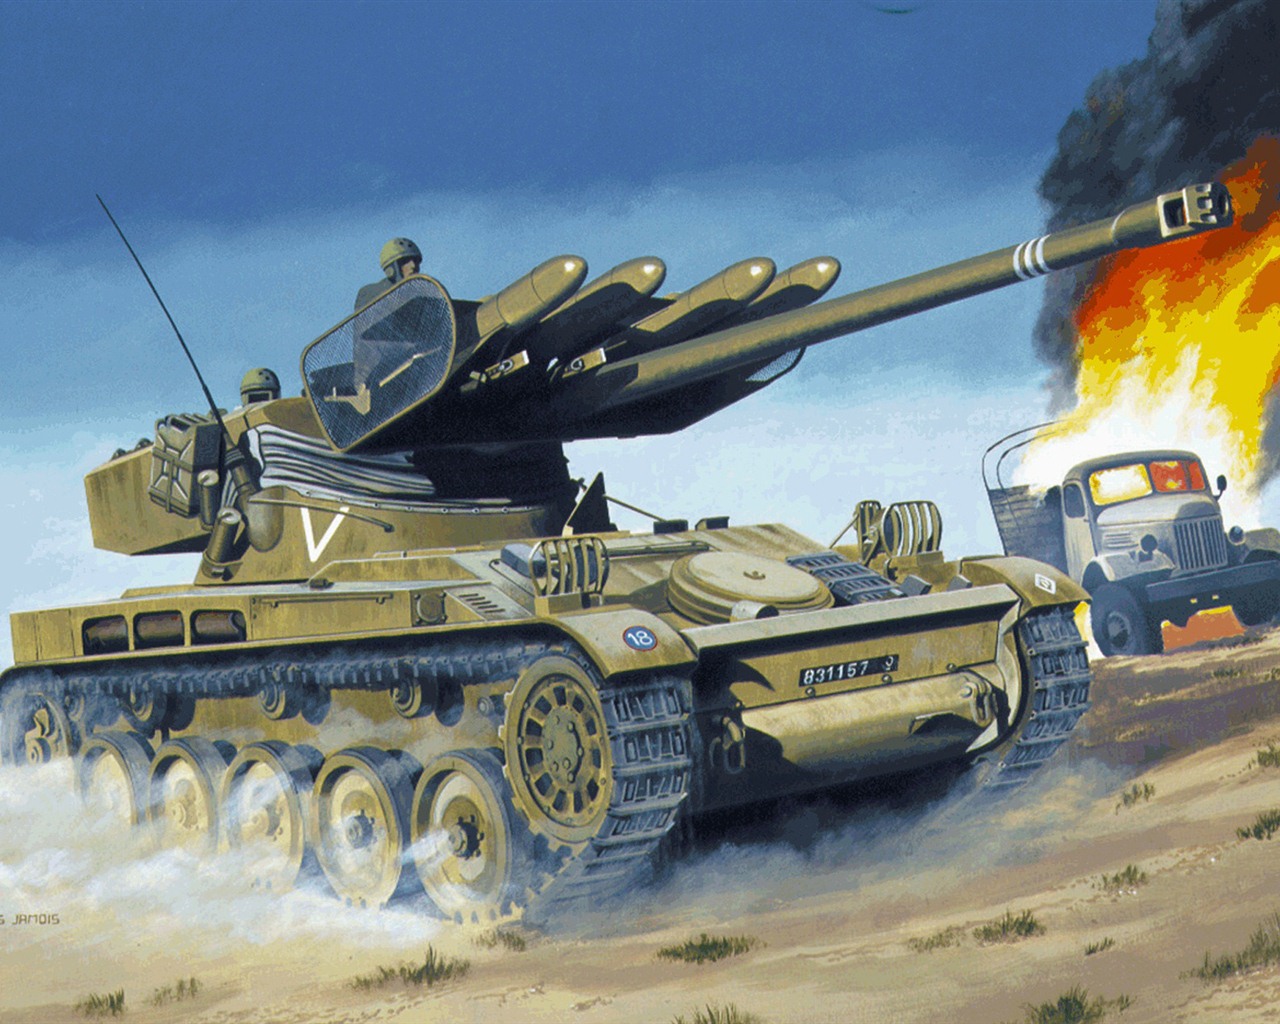 Military tanks, armored HD painting wallpapers #5 - 1280x1024